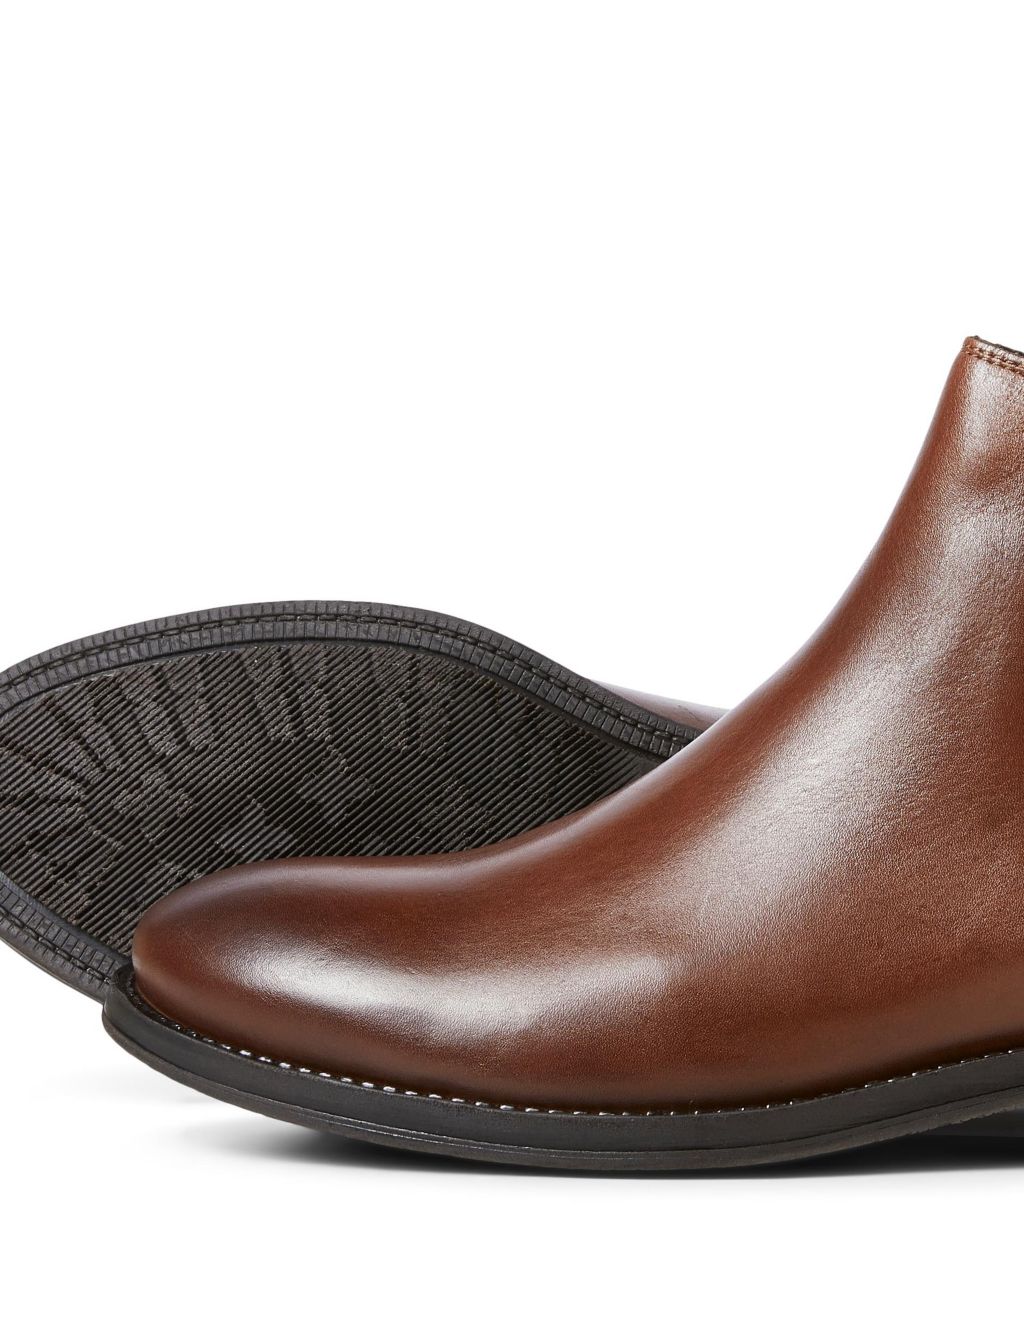 Leather Chelsea Boots image 4